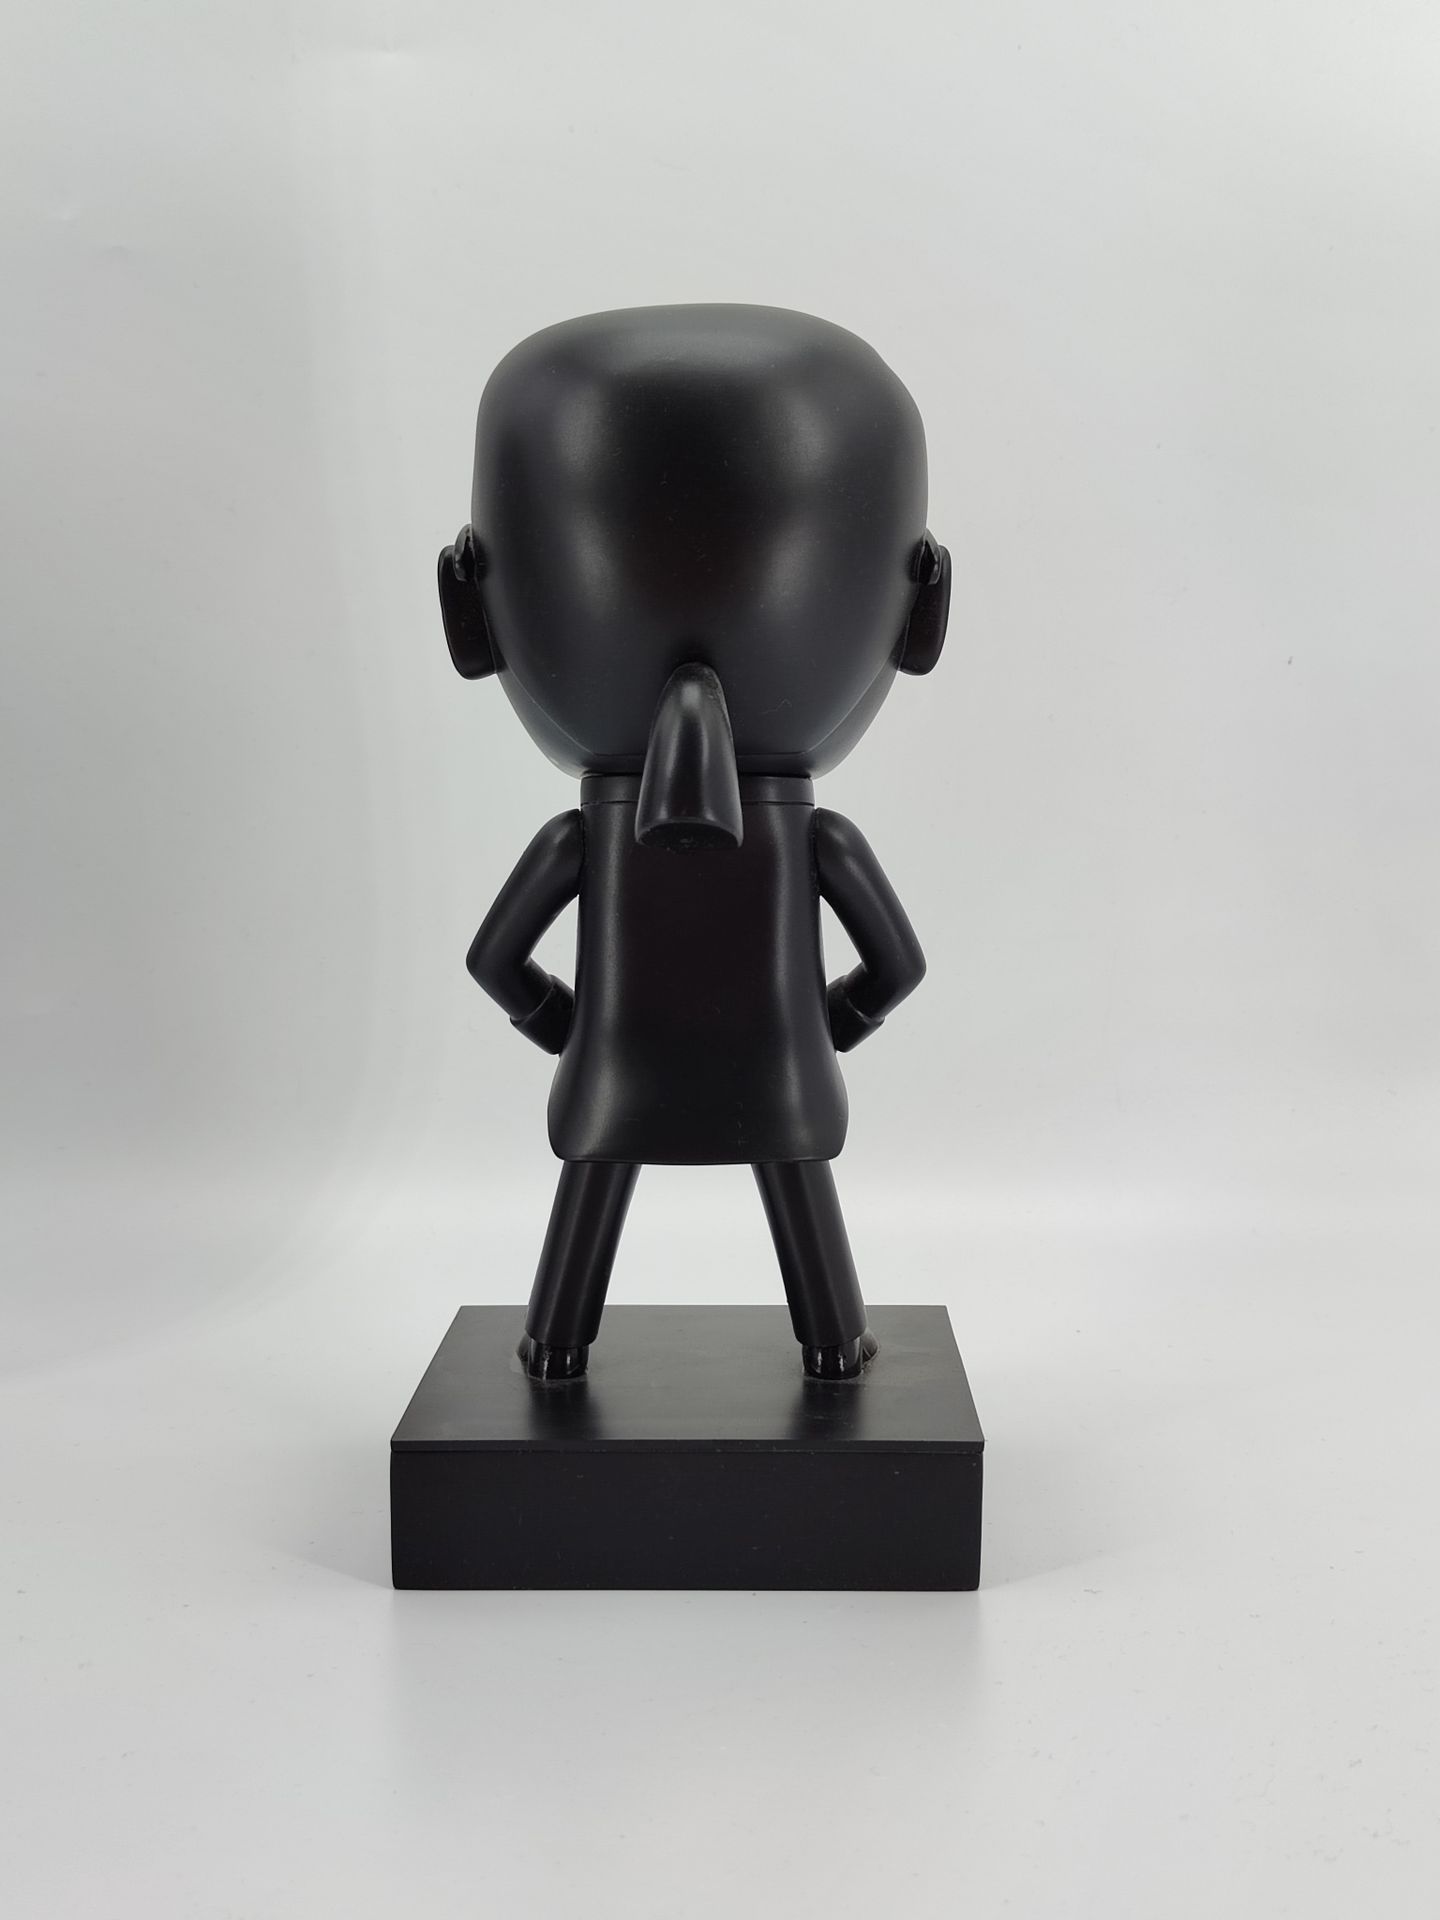 Null Tokidoki X Karl Lagerfeld.
KL full black.
With authenticity card, numbered &hellip;